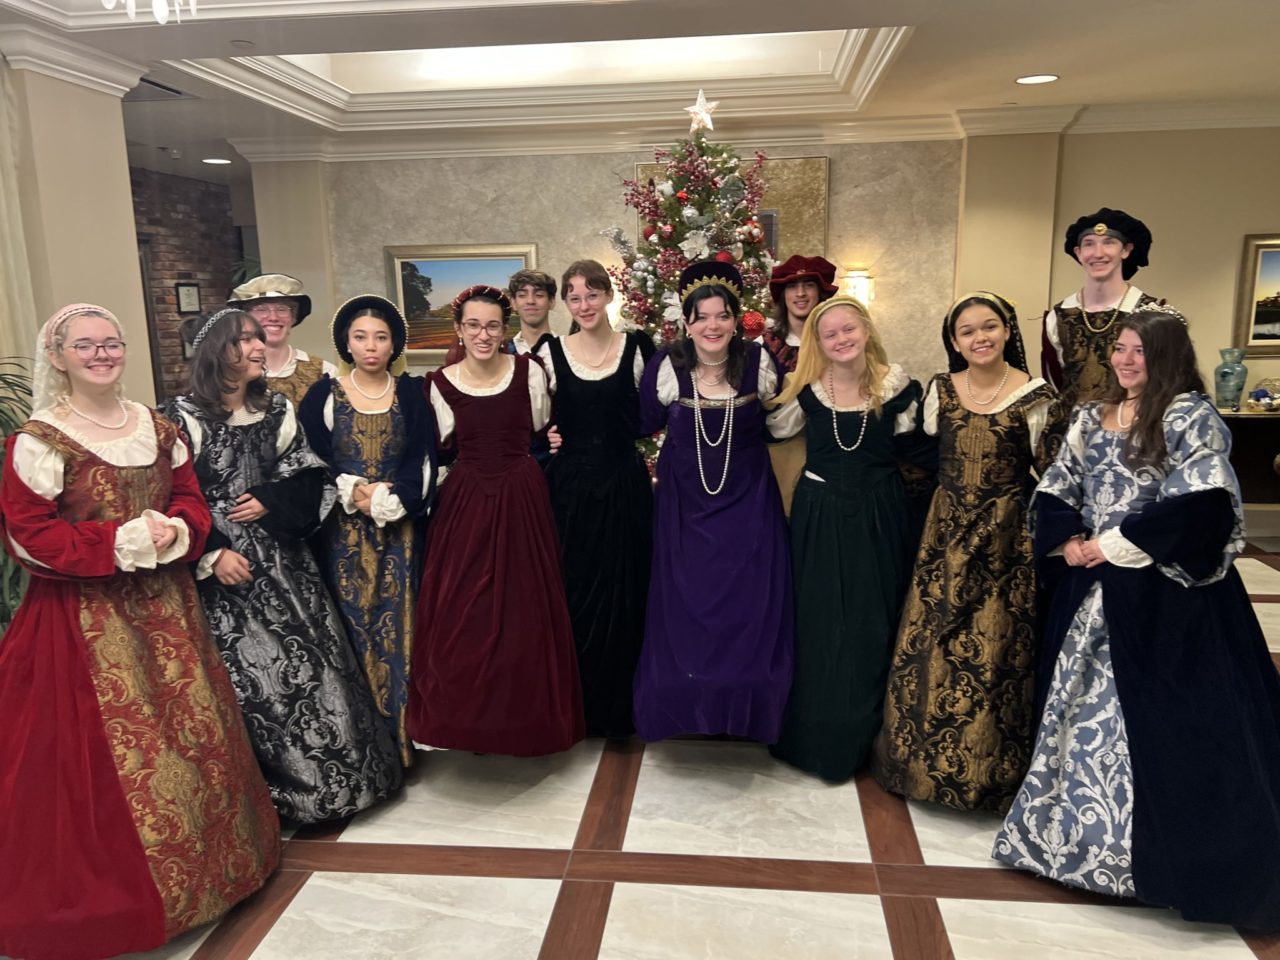 High schoolers posing in Renaissance dress at our Ybor City, Florida hotel